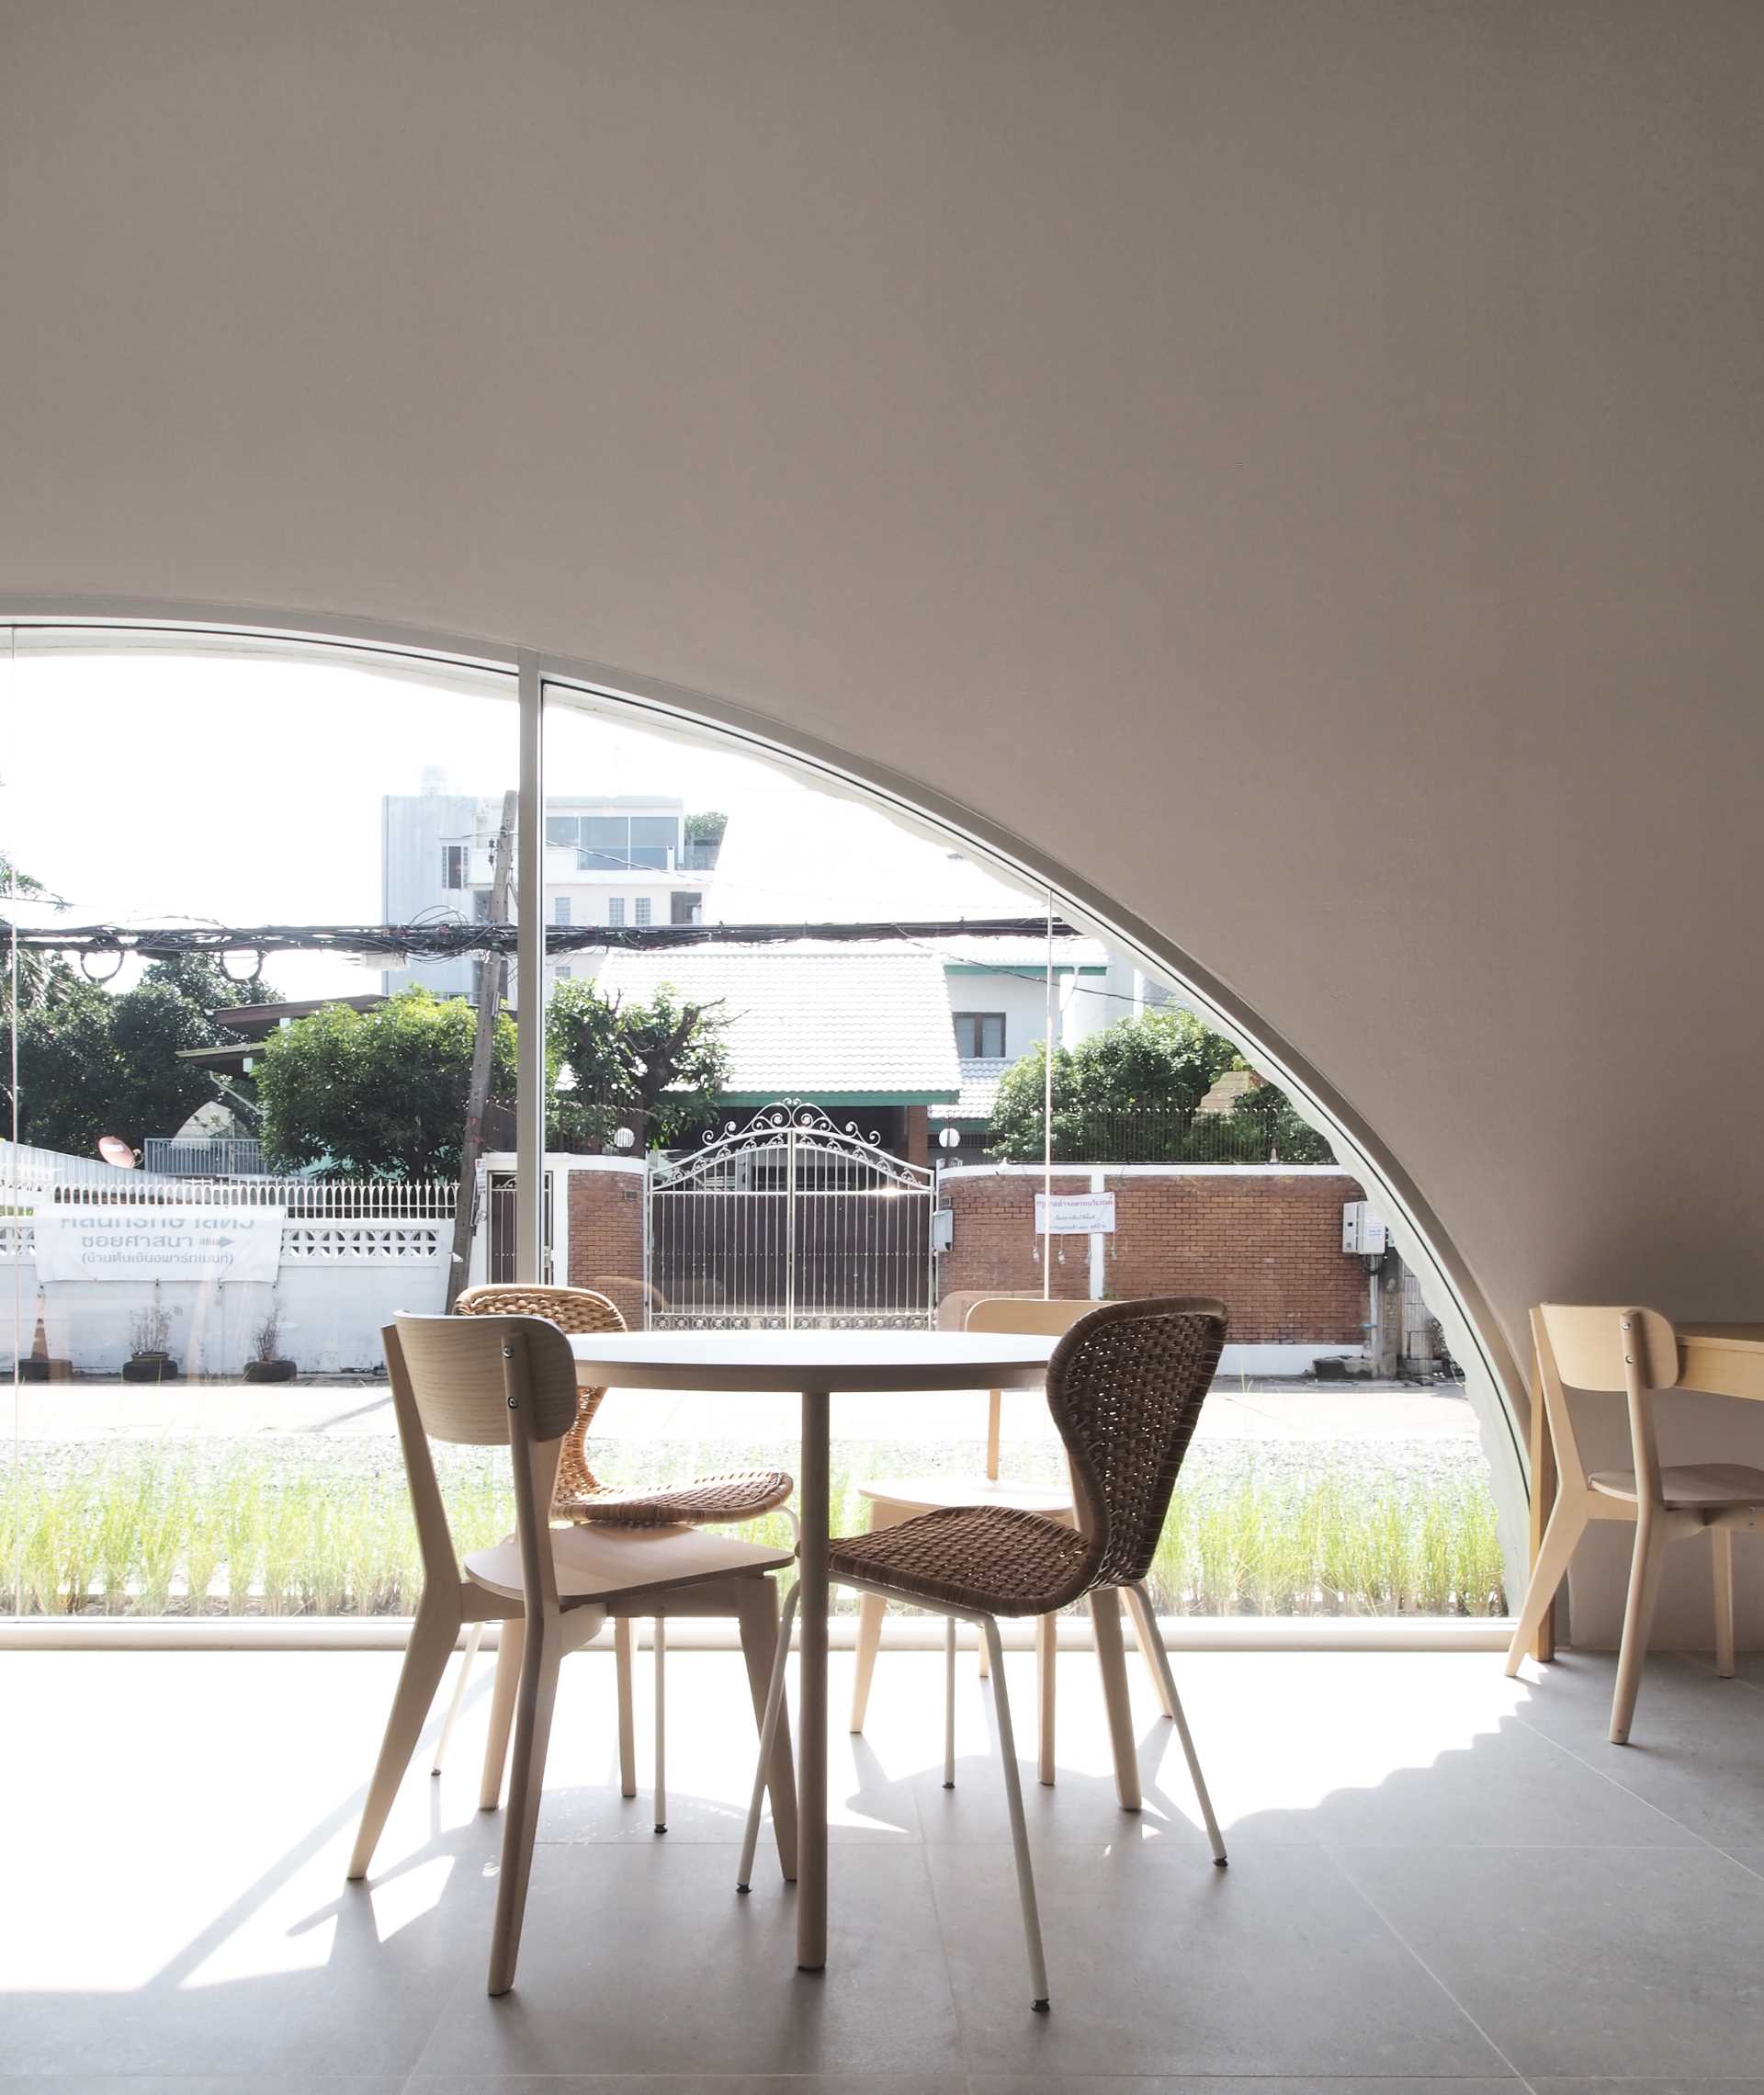 A modern cafe with an arched window.